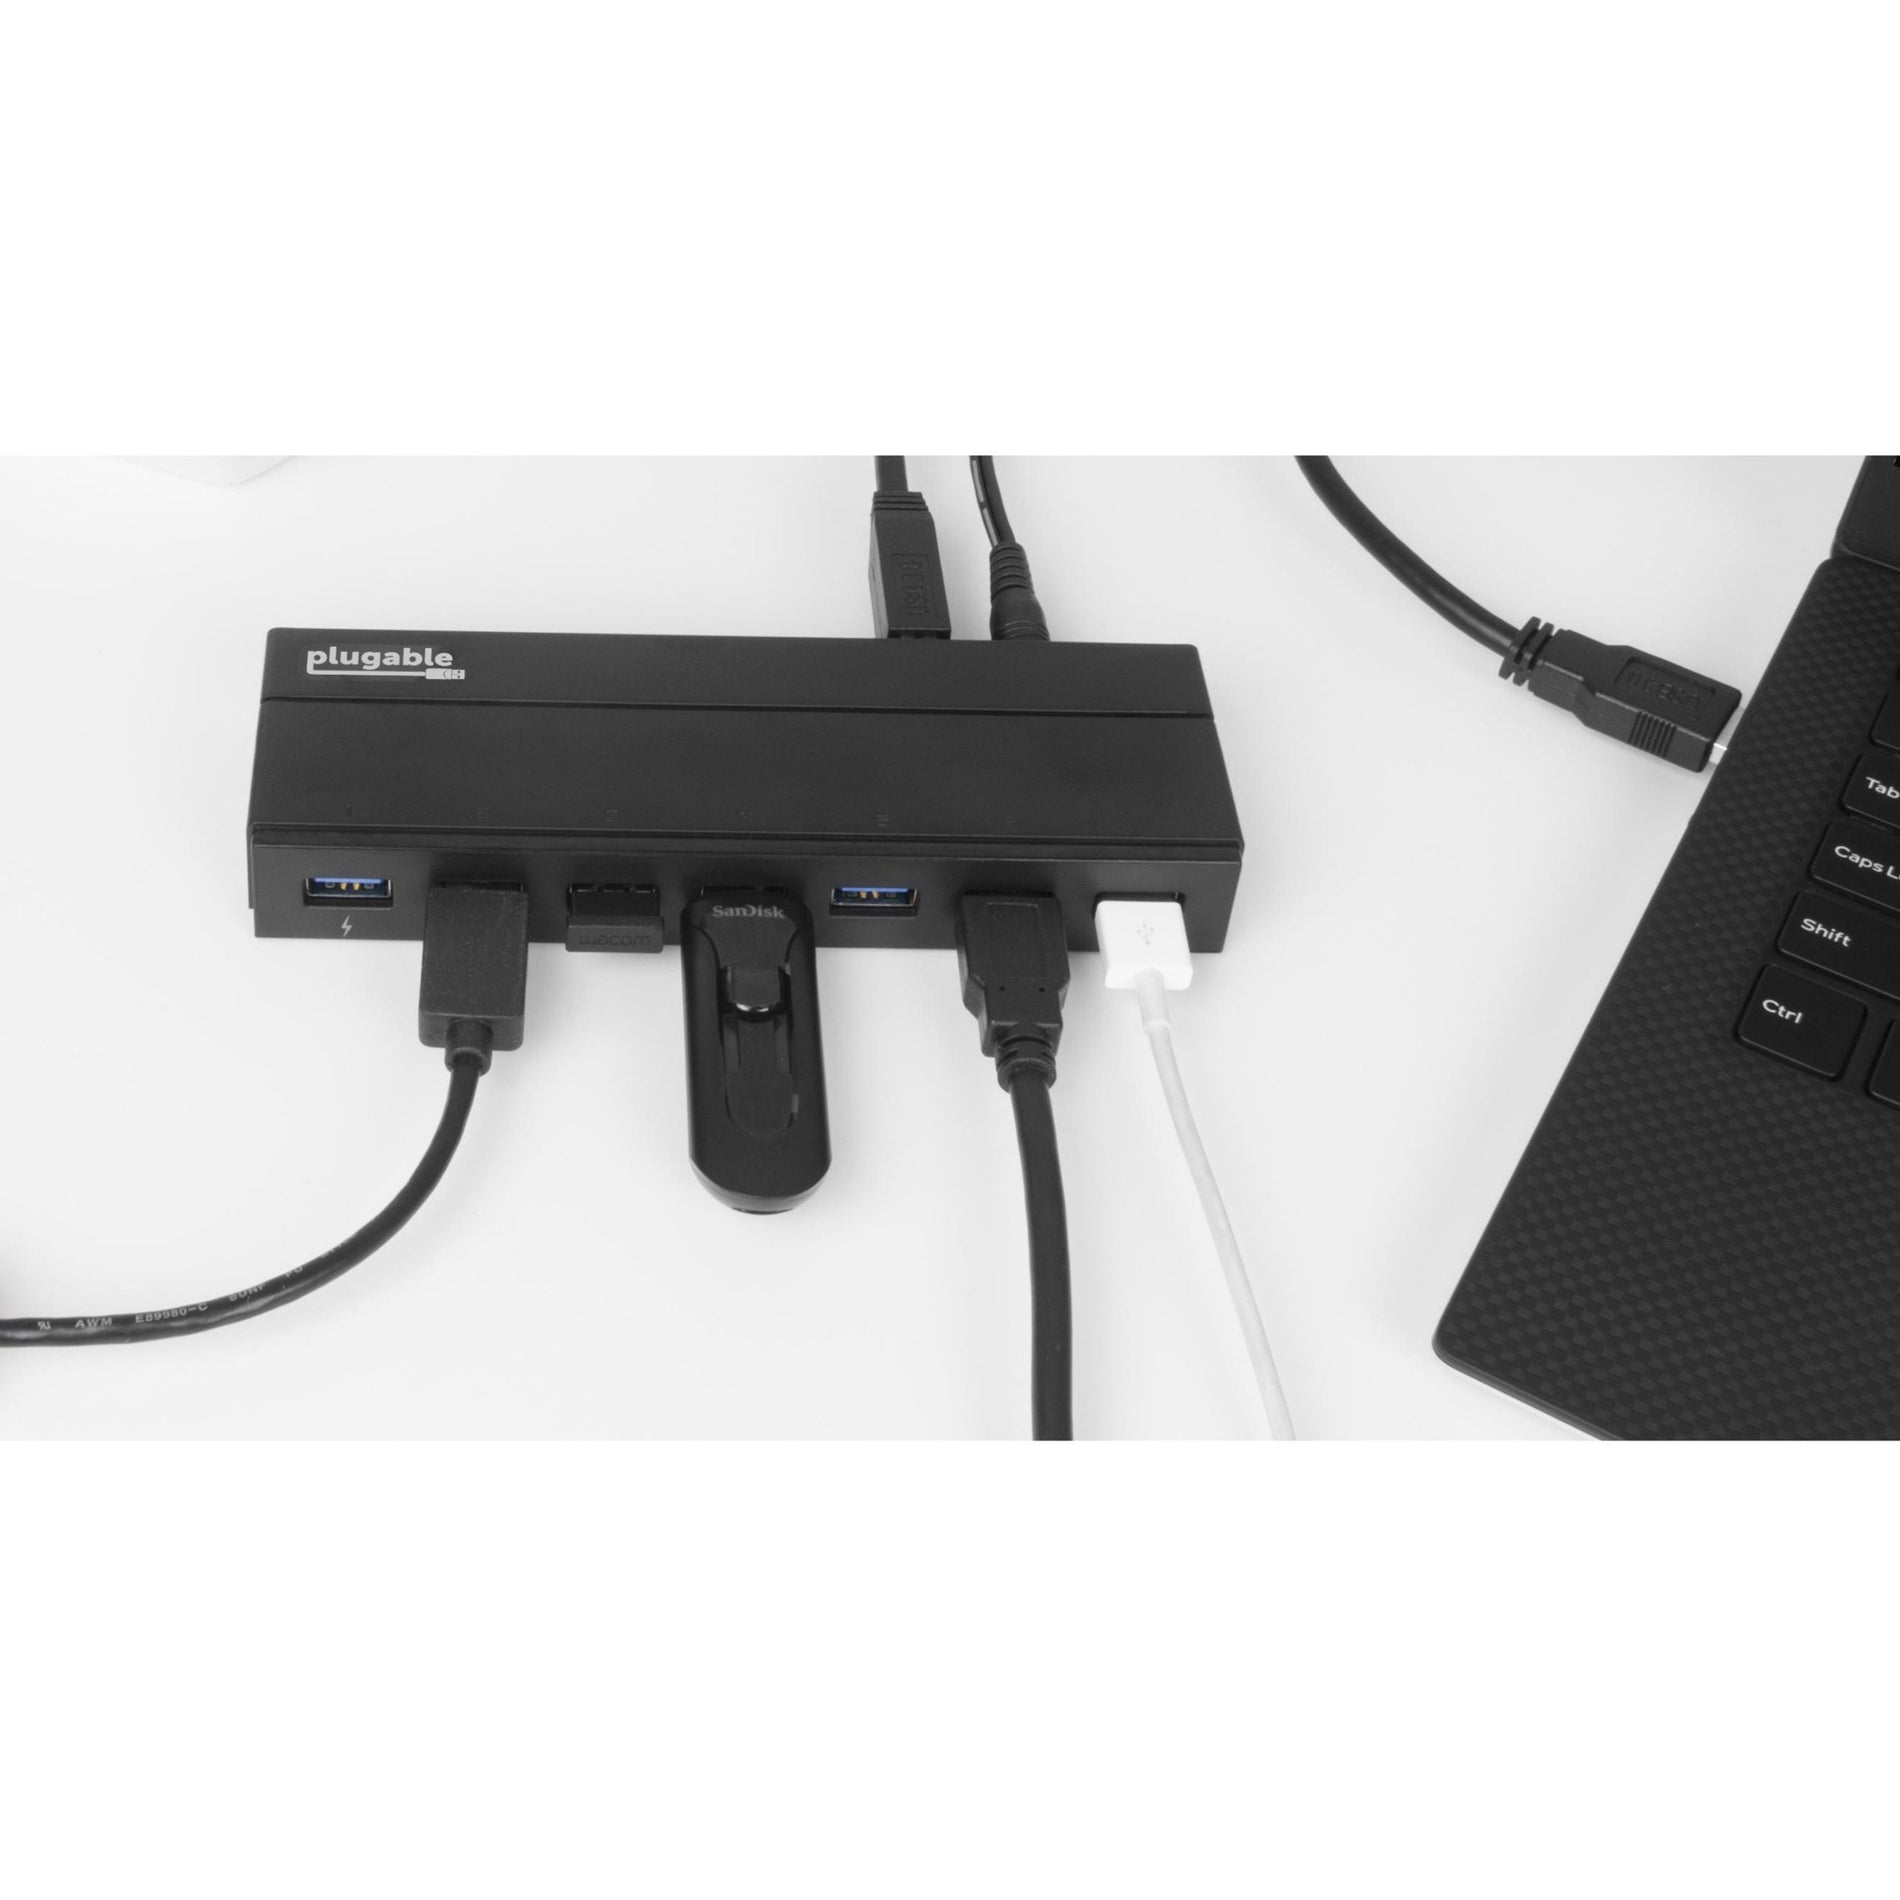 Plugable USB3-HUB7C USB 3.0 7-Port Hub with 36W Power Adapter Expand Your USB Connectivity